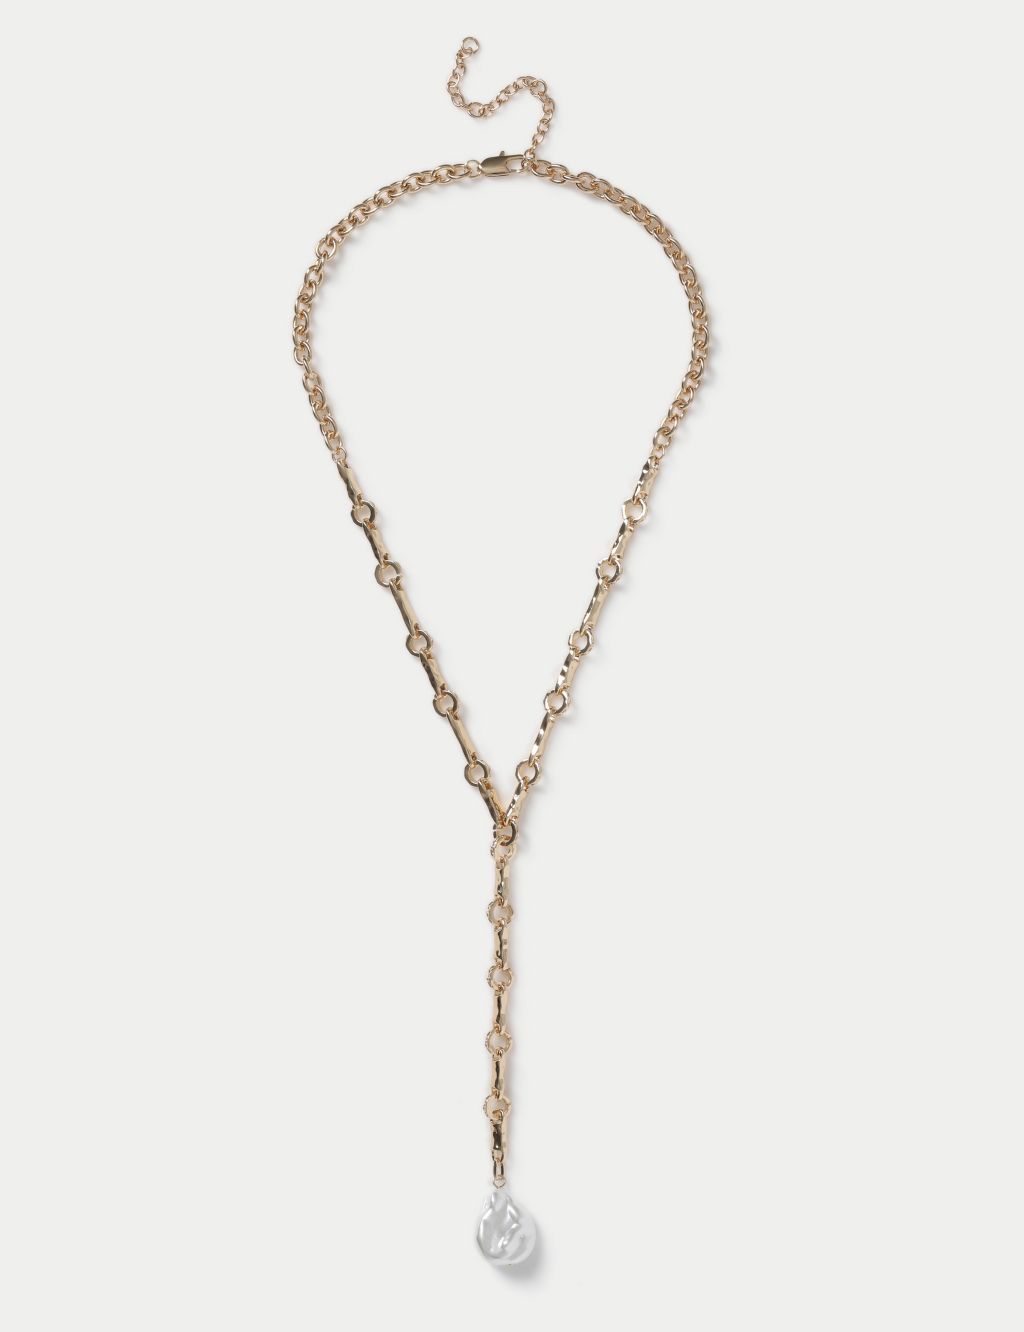 Gold Tone Pearl Long Y Necklace